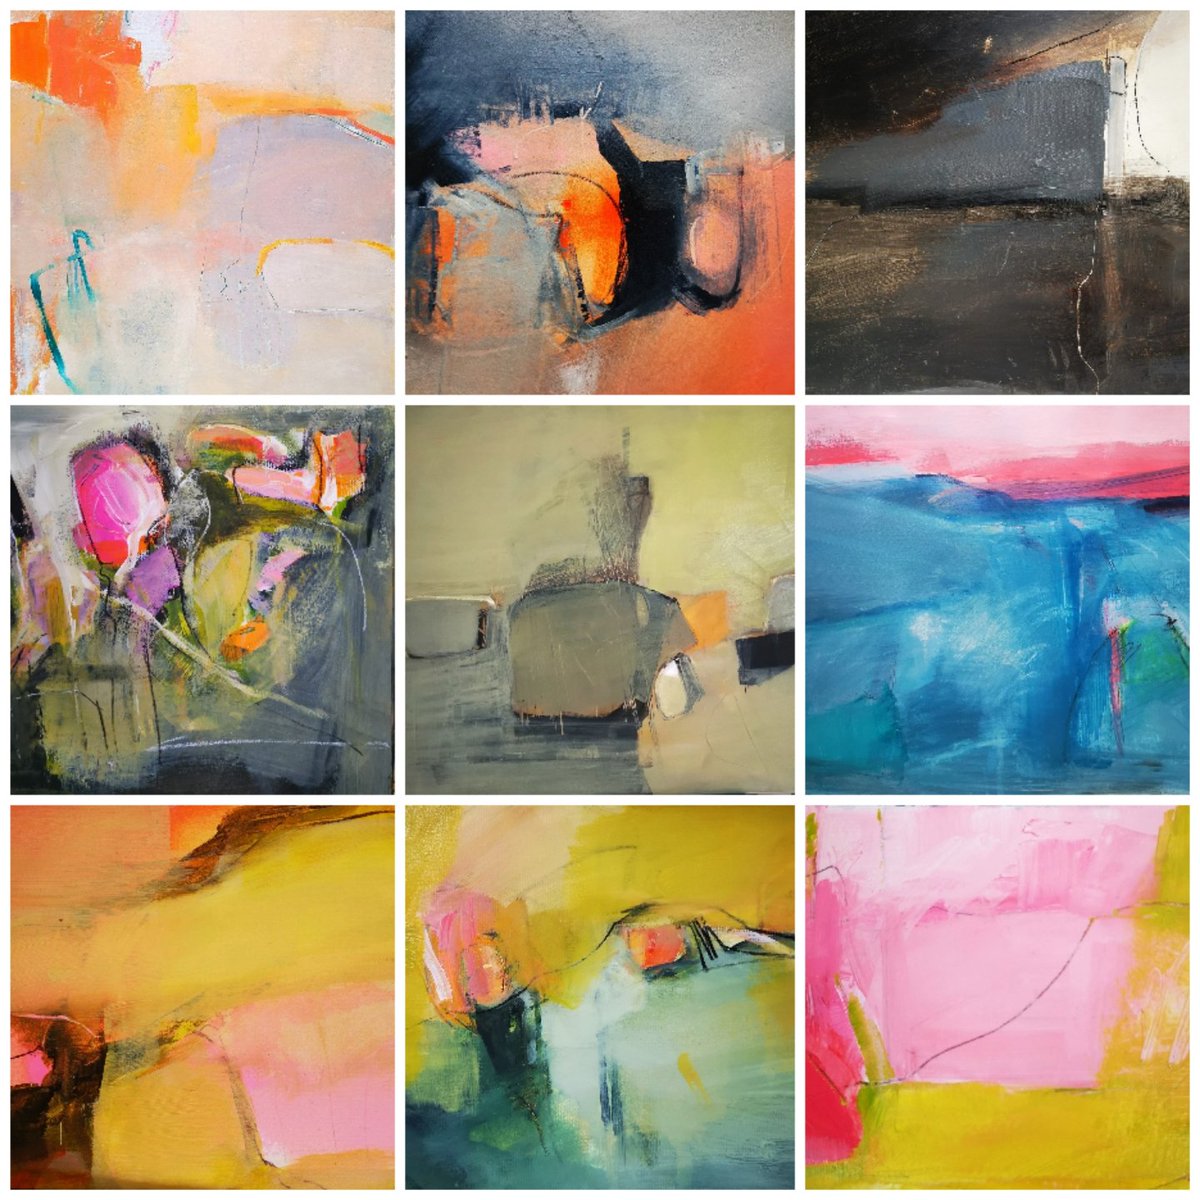 A year in paintings
#abstractart #art #abstractpainting #artist #ArtistOnTwitter #lockdownart #colour #manycolours #SaturdayMotivation